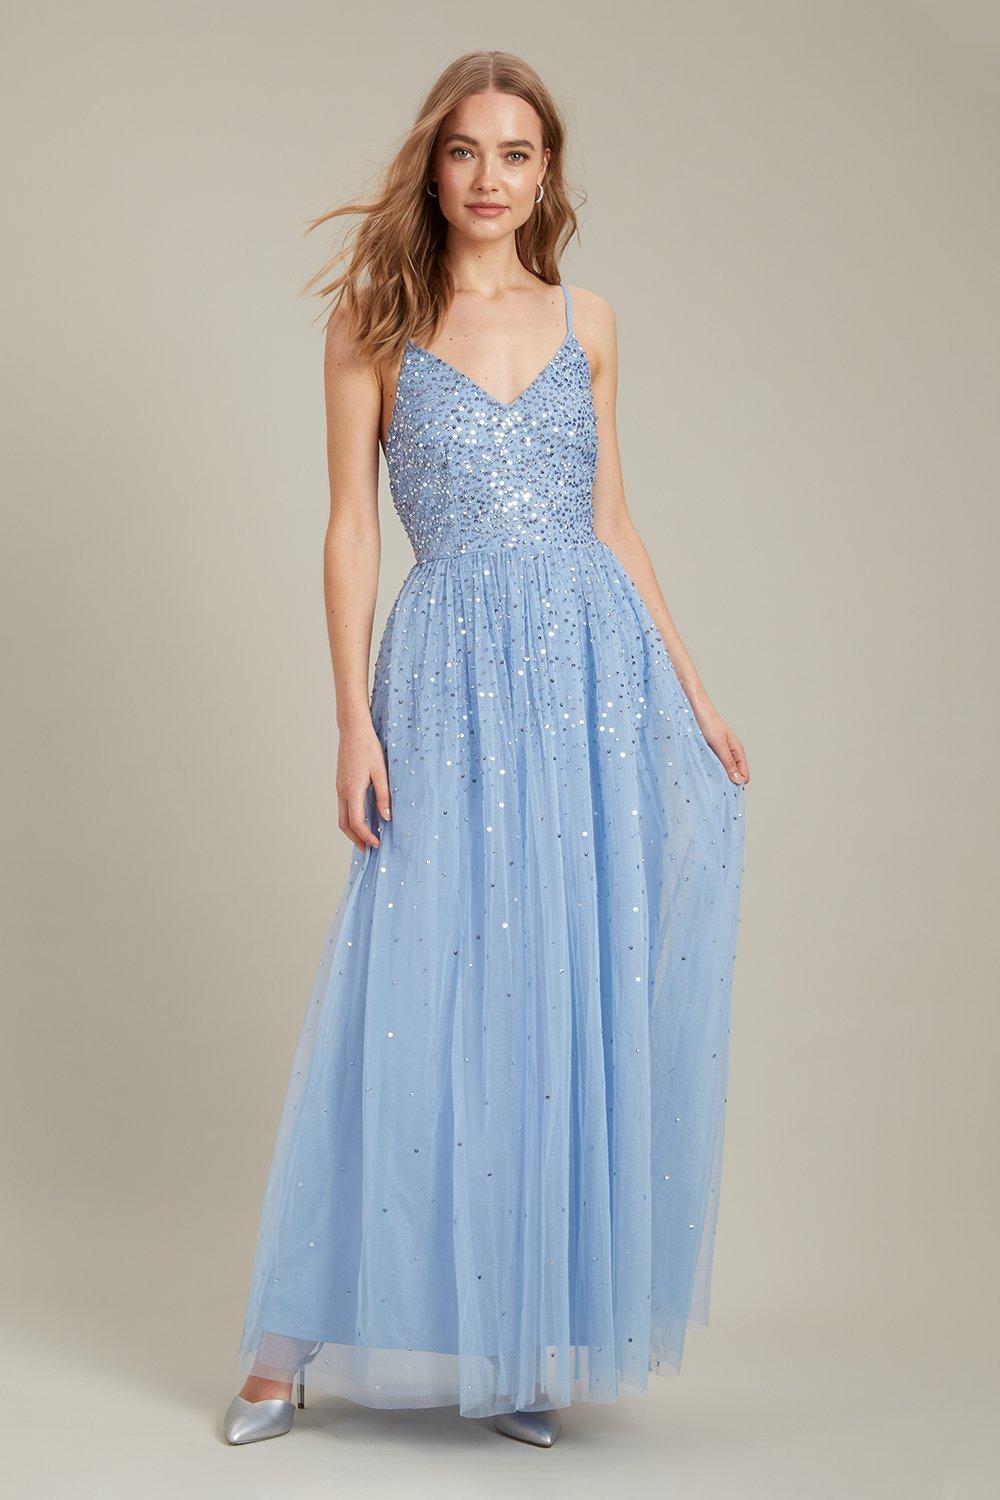 Women's Embellished Strappy Tulle Maxi Dress - blue - 14